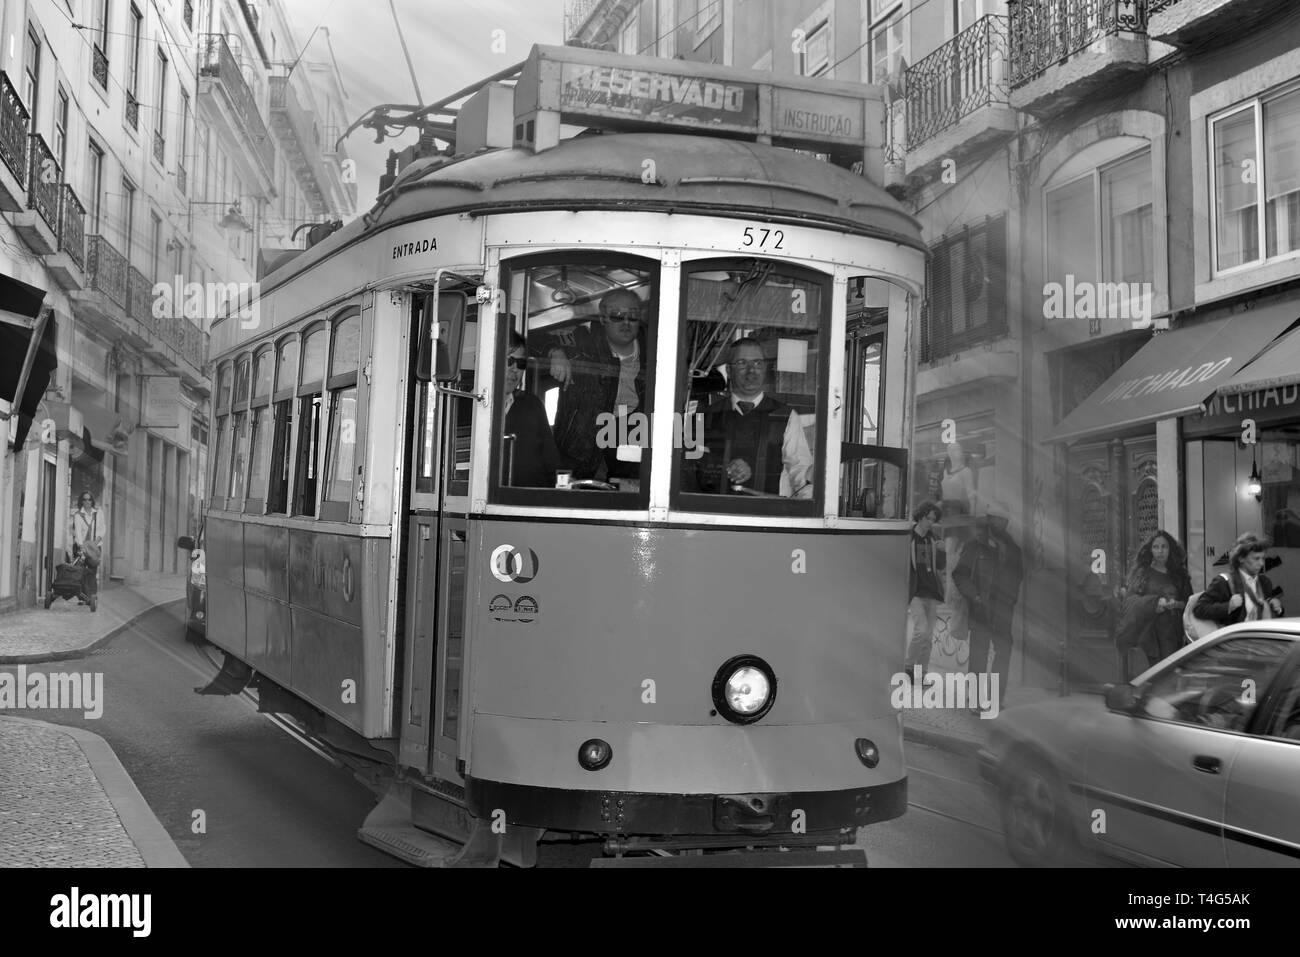 Portugal, Lisbon, Bairro Alto, tram, Electrico, tramway, streetcar, people, architecture, charming, picturesque, nostalgia, nostalgic, public transports in Lisbon, center of Lisbon, sightseeing, discovering Lisbon, travel, tourism, black and white, black a | usage worldwide Stock Photo